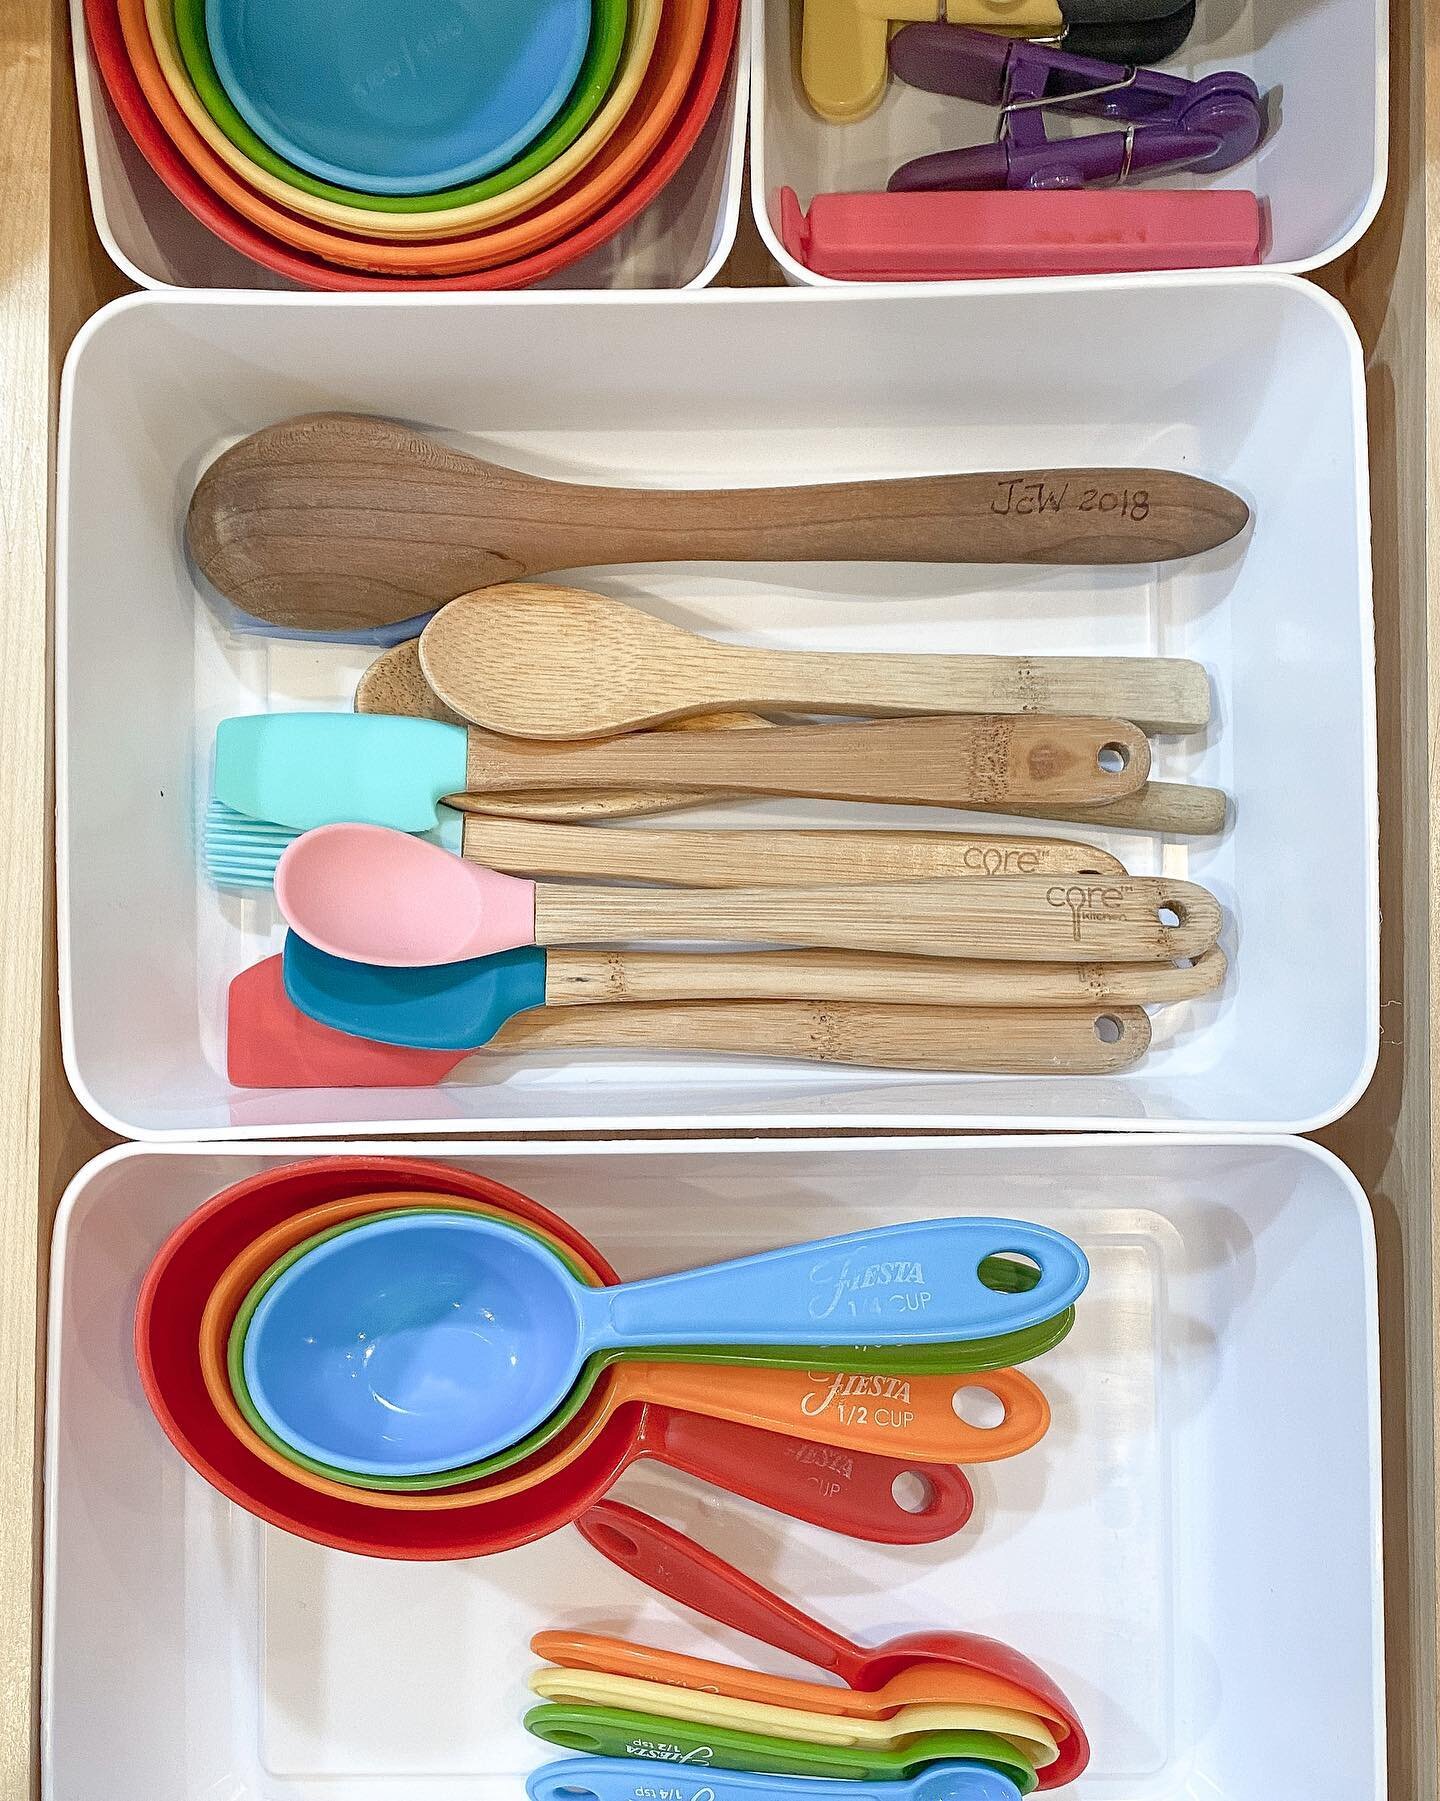 What a difference some simple drawer organizers make! You can find these at Target starting at only $2 for a pack of 2.